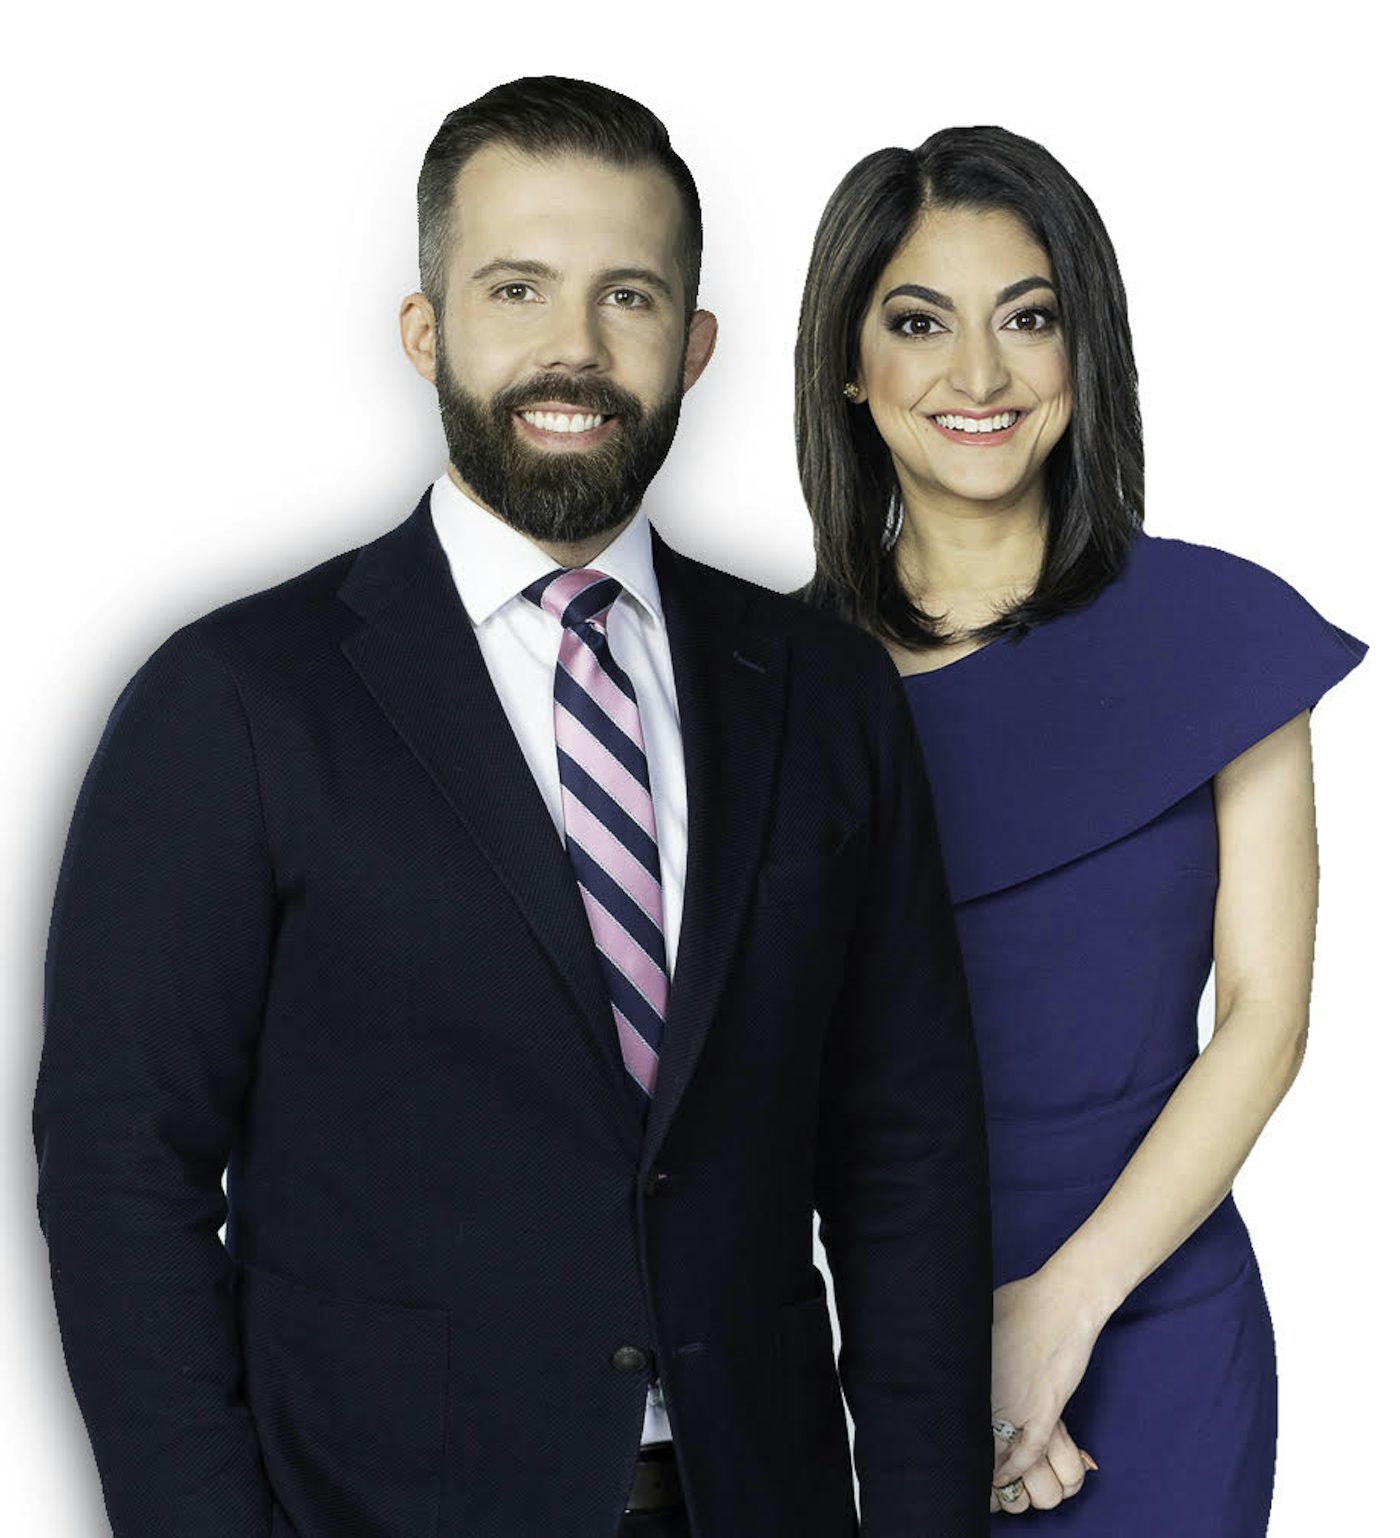 Image for the Ziyah Karmali and Kent Morrison Announced as New Co-Host Team for CTV MORNING LIVE, Beginning November 2 press release